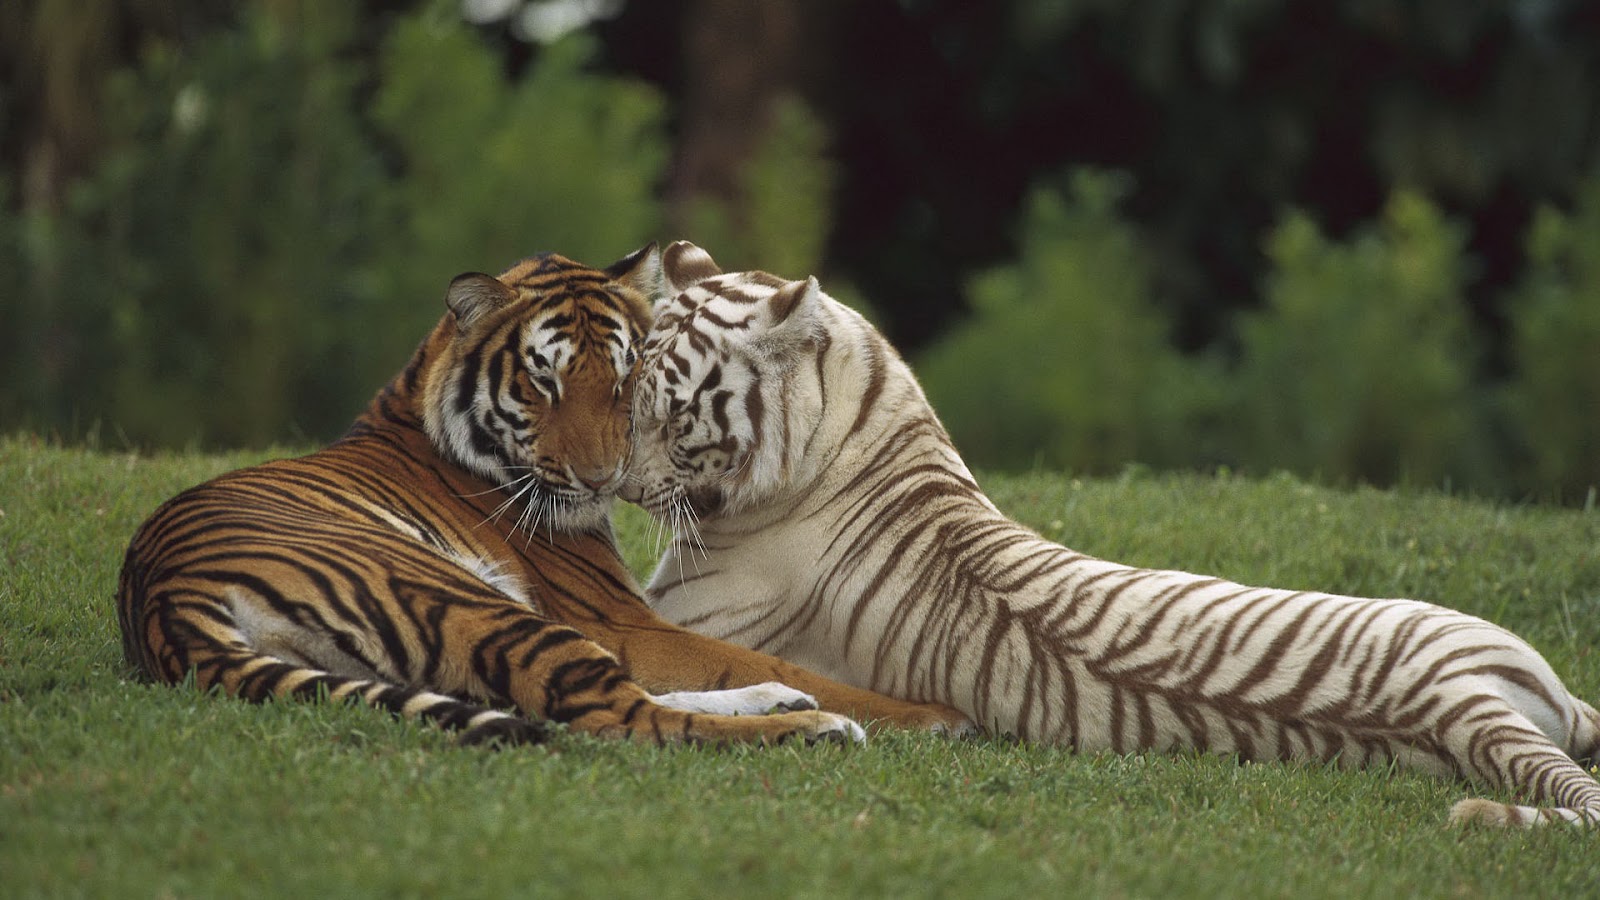 http://3.bp.blogspot.com/-SNQIaRXFVVQ/UCQQcCUohBI/AAAAAAAAAL4/jy9p0T5961Y/s1600/hd-tiger-wallpaper-with-two-cuddling-tigers-background-picture.jpg